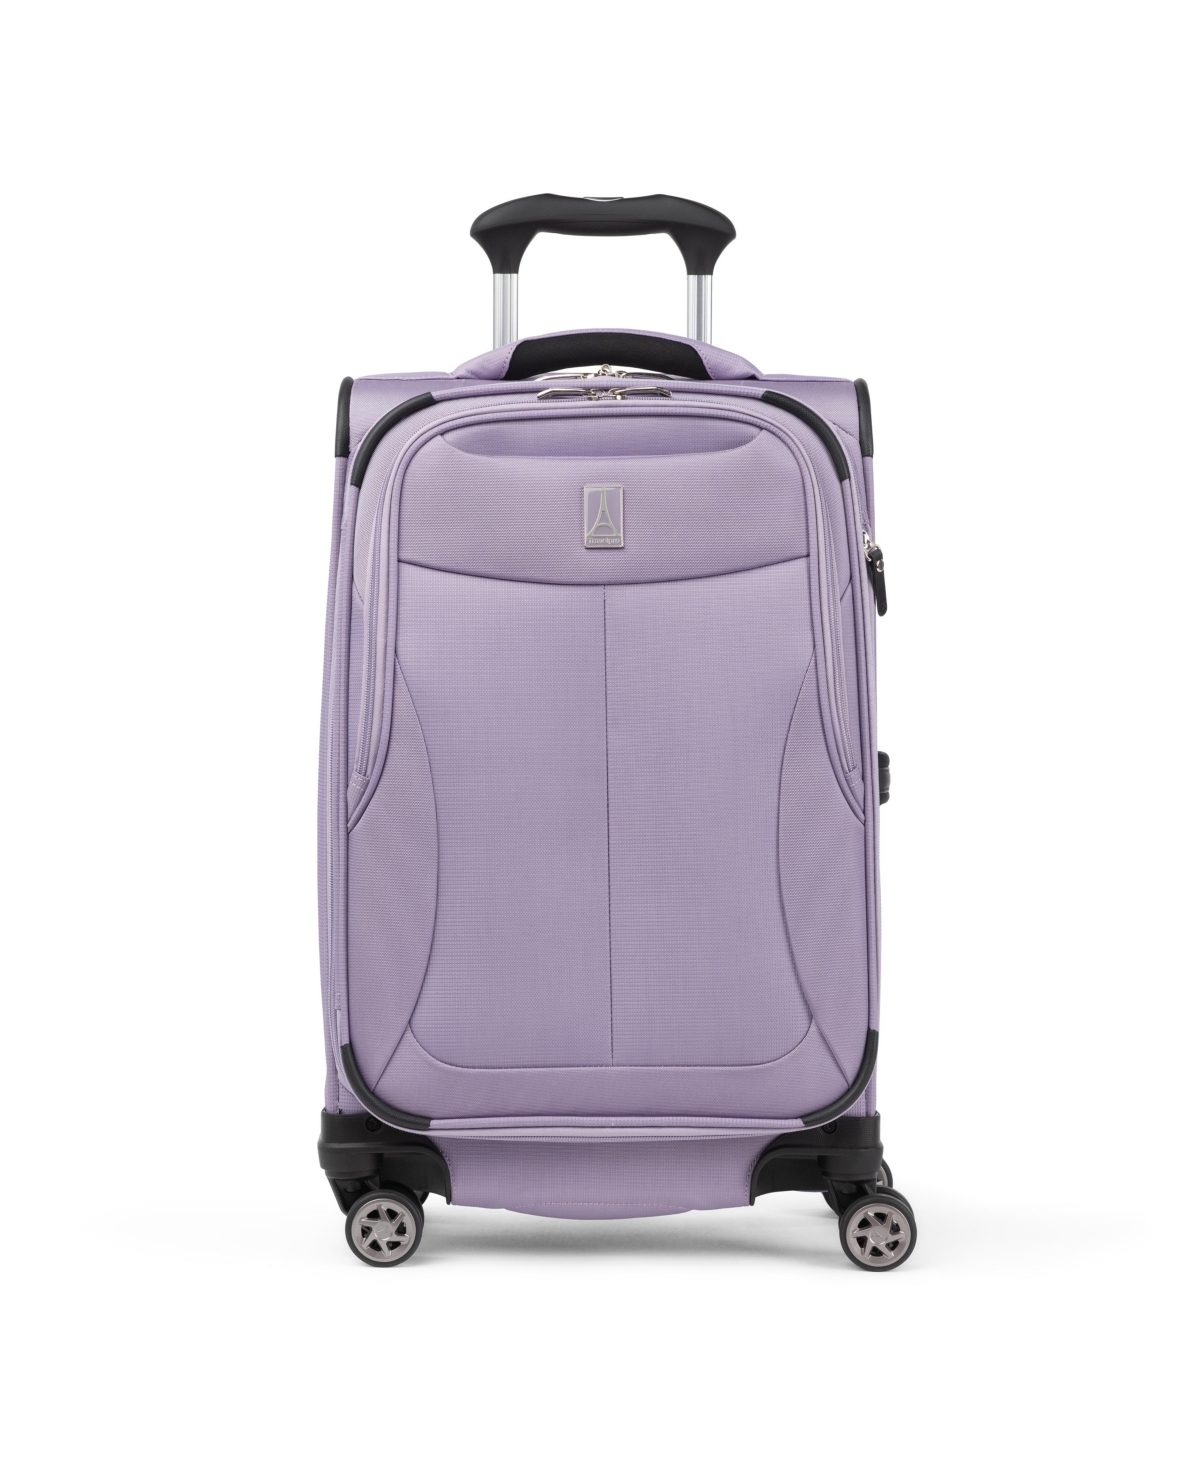 WindSpeed Select Underseat Spinner Carry-On – Travelpro Luggage Outlet